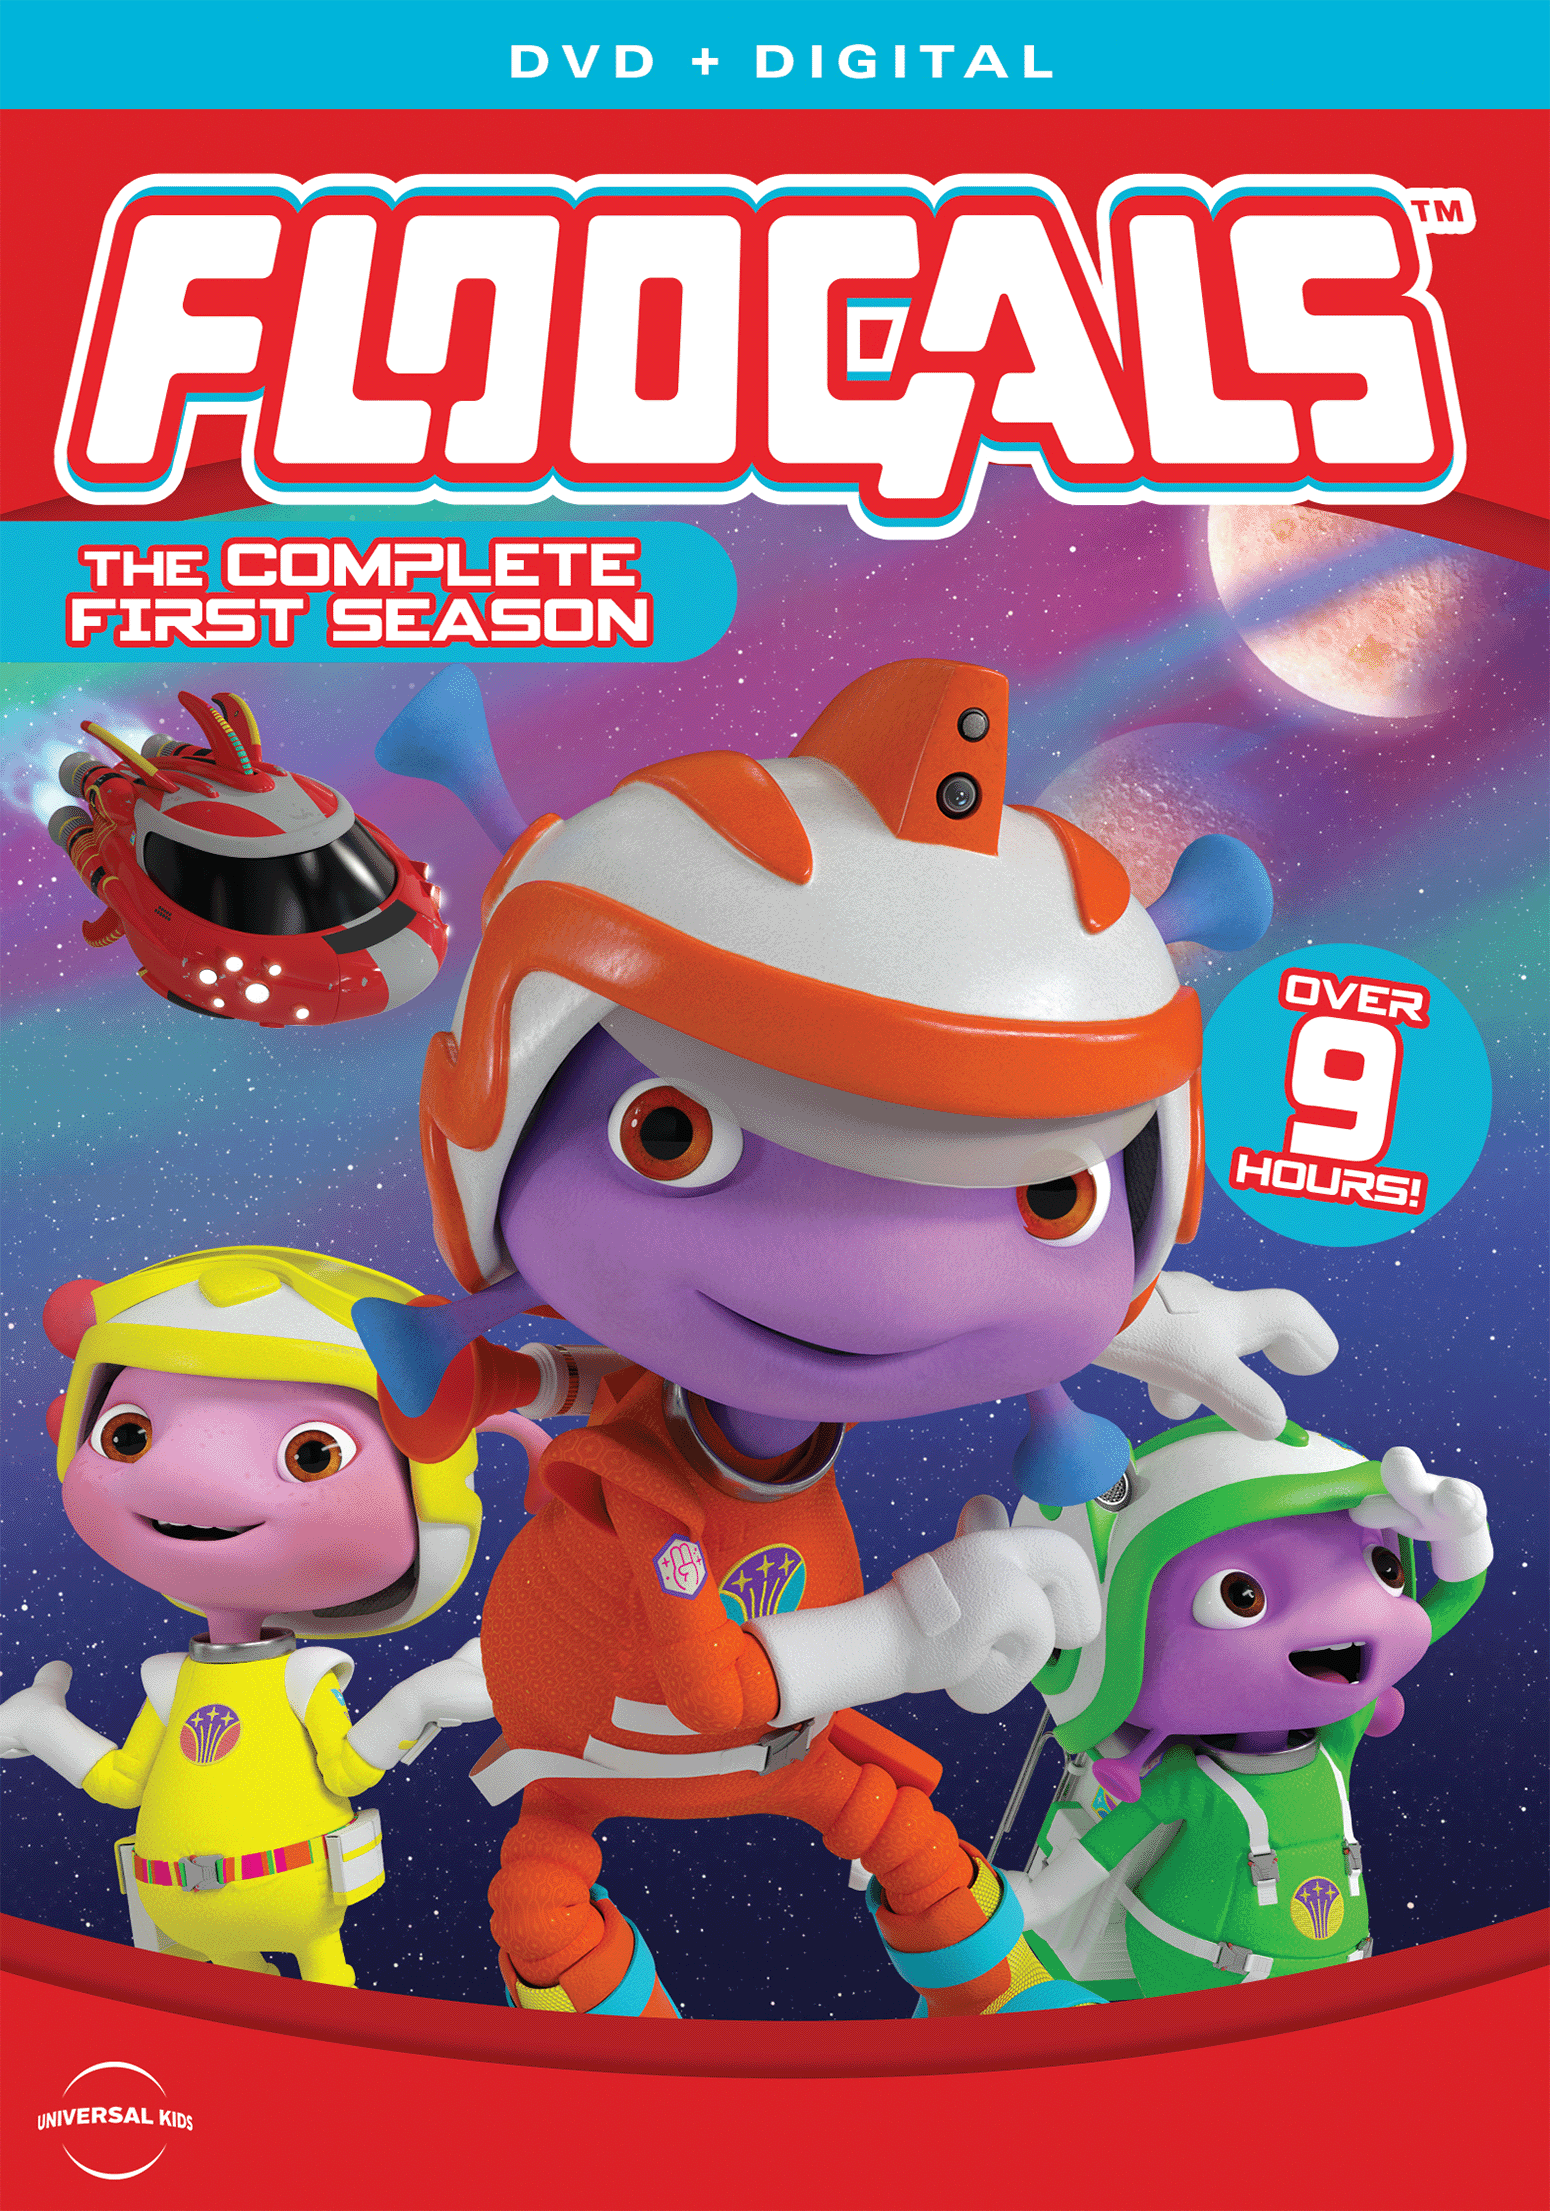 Movie Review: Floogals: Season One * Mini Aliens Help Preschoolers Discover How The World Works